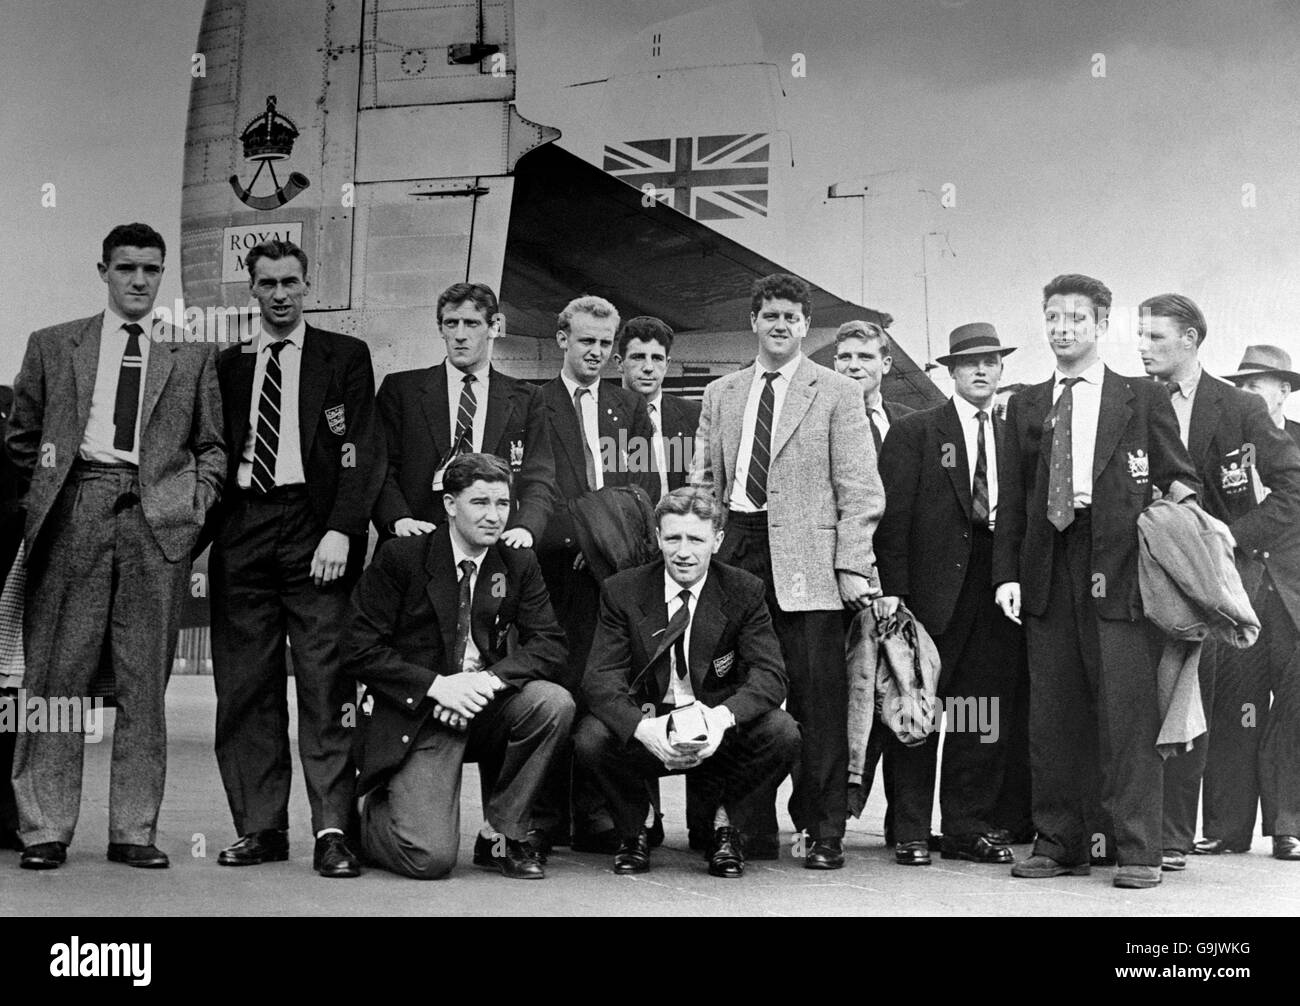 Manchester United embark on a trip aboard a Royal Navy plane prior to their European Cup preliminary round match away to Shamrock Rovers which they won 6-0: (l-r) Bill Foulkes (released from hospital), Ray Wood (multiple flesh wounds), Dennis Viollet (head injuries and concussion), Jackie Blanchflower Fracture of right arm and broken pelvis), Peter Jones, Alex Dawson, Roger Byrne (dead), Tommy Taylor (dead), Duncan Edwards (dead), Eddie Colman (dead), David Pegg (dead), Mark Jones (dead) Stock Photo